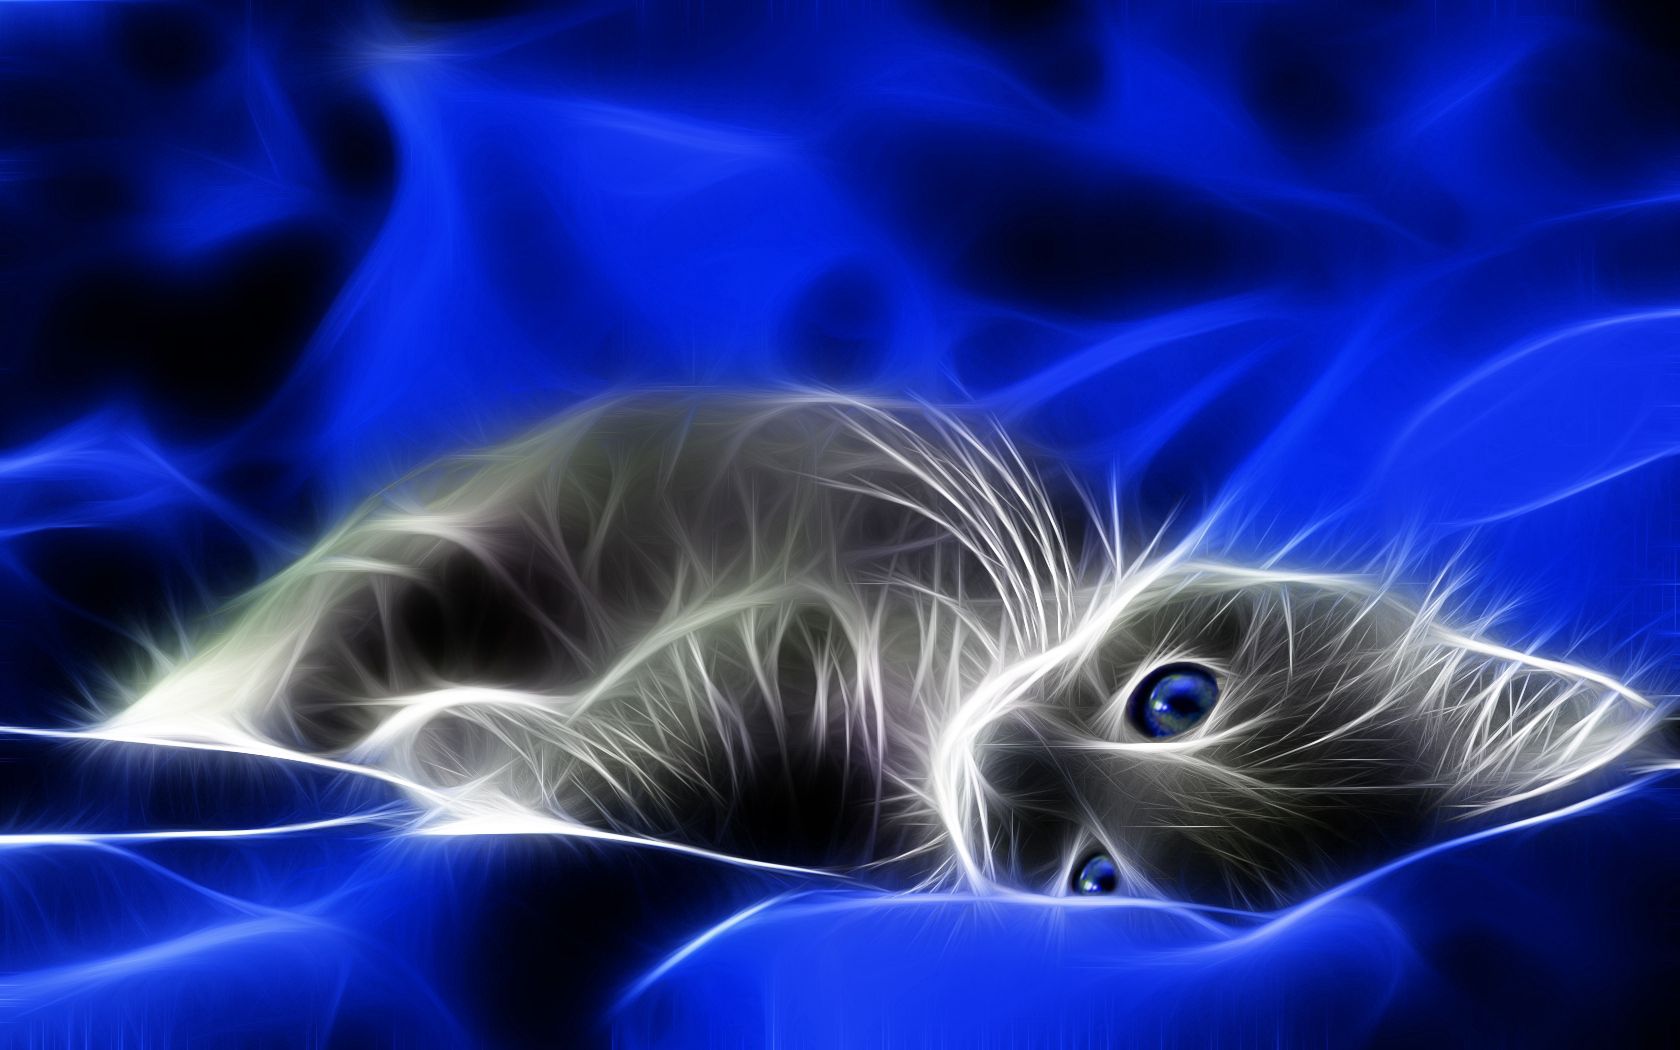 74098 3840x2160 PC pictures for free, download bed, grey, kitten, kitty 3840x2160 wallpapers on your desktop